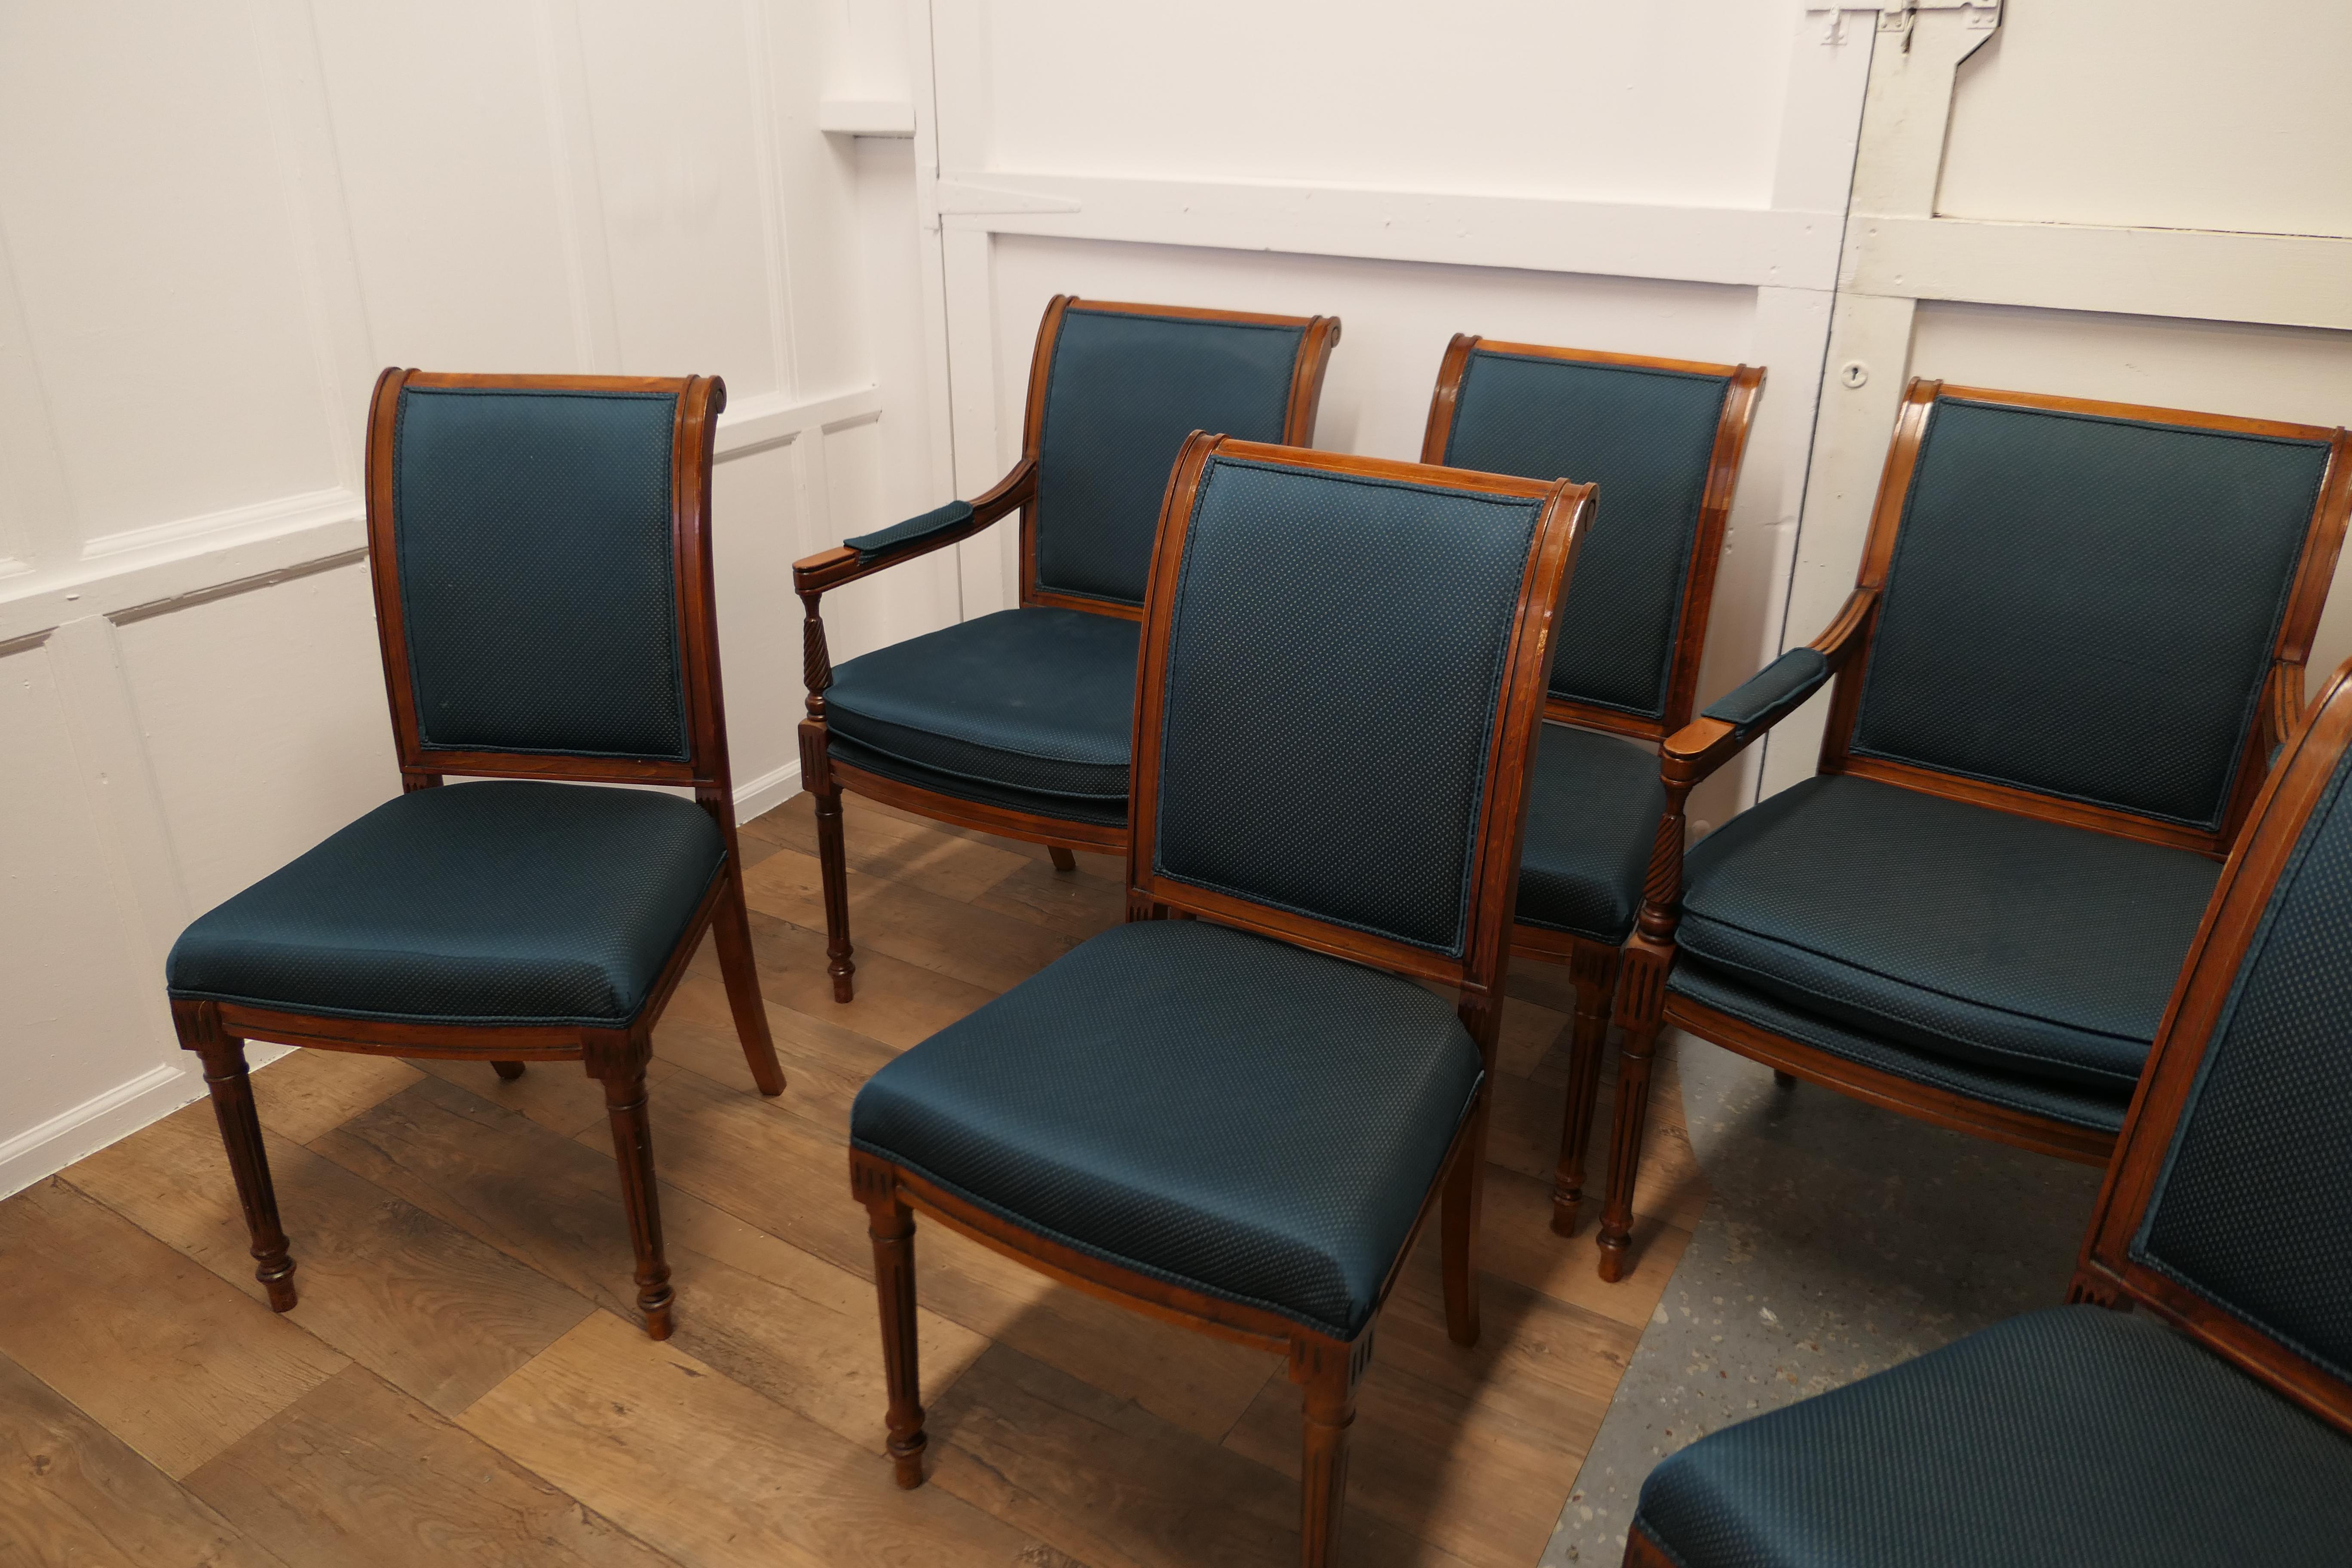 Mid-Century Modern Set of 6 Midcentury Teak Dining Chairs in the Regency Style a Good Quality Set For Sale